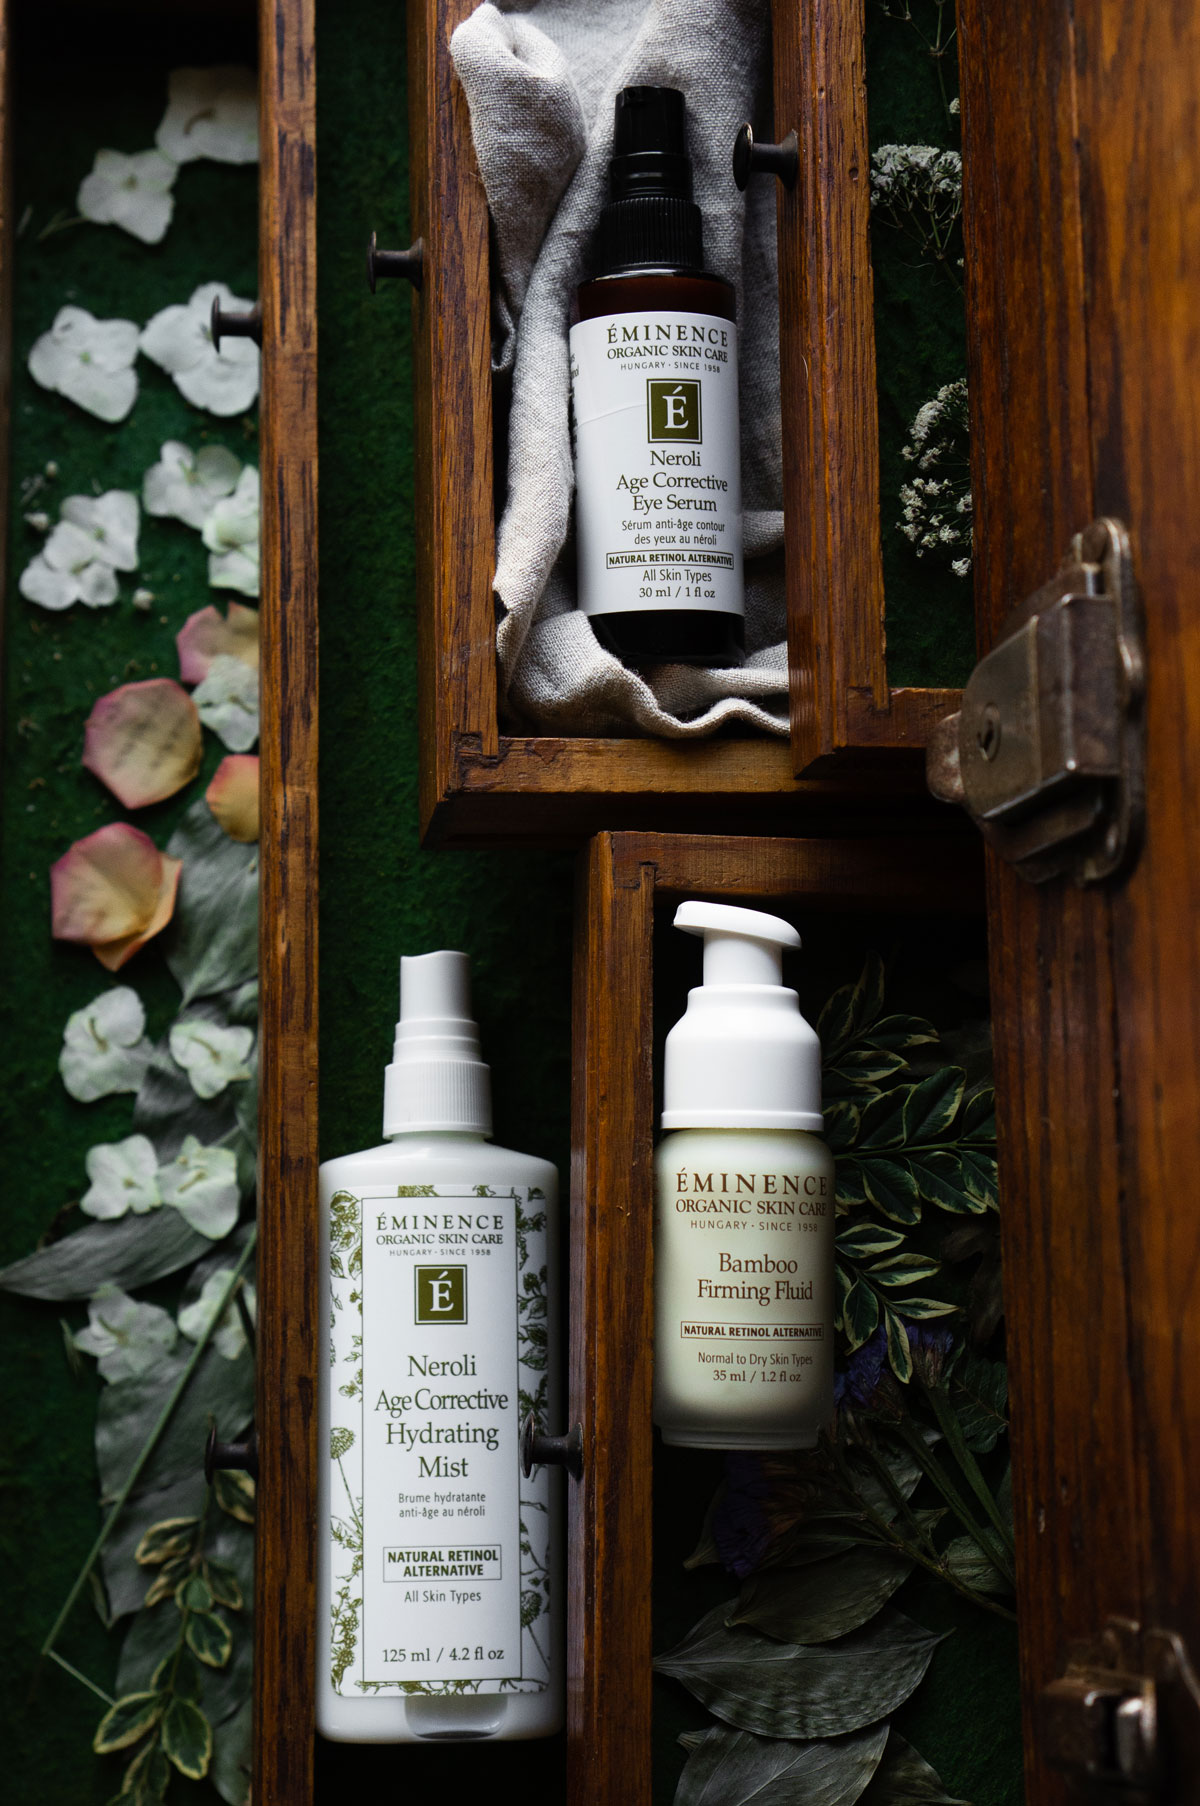 Eminence Organics' Natural Retinol Alternative offers a wide array of benefits without the uncomfortable...